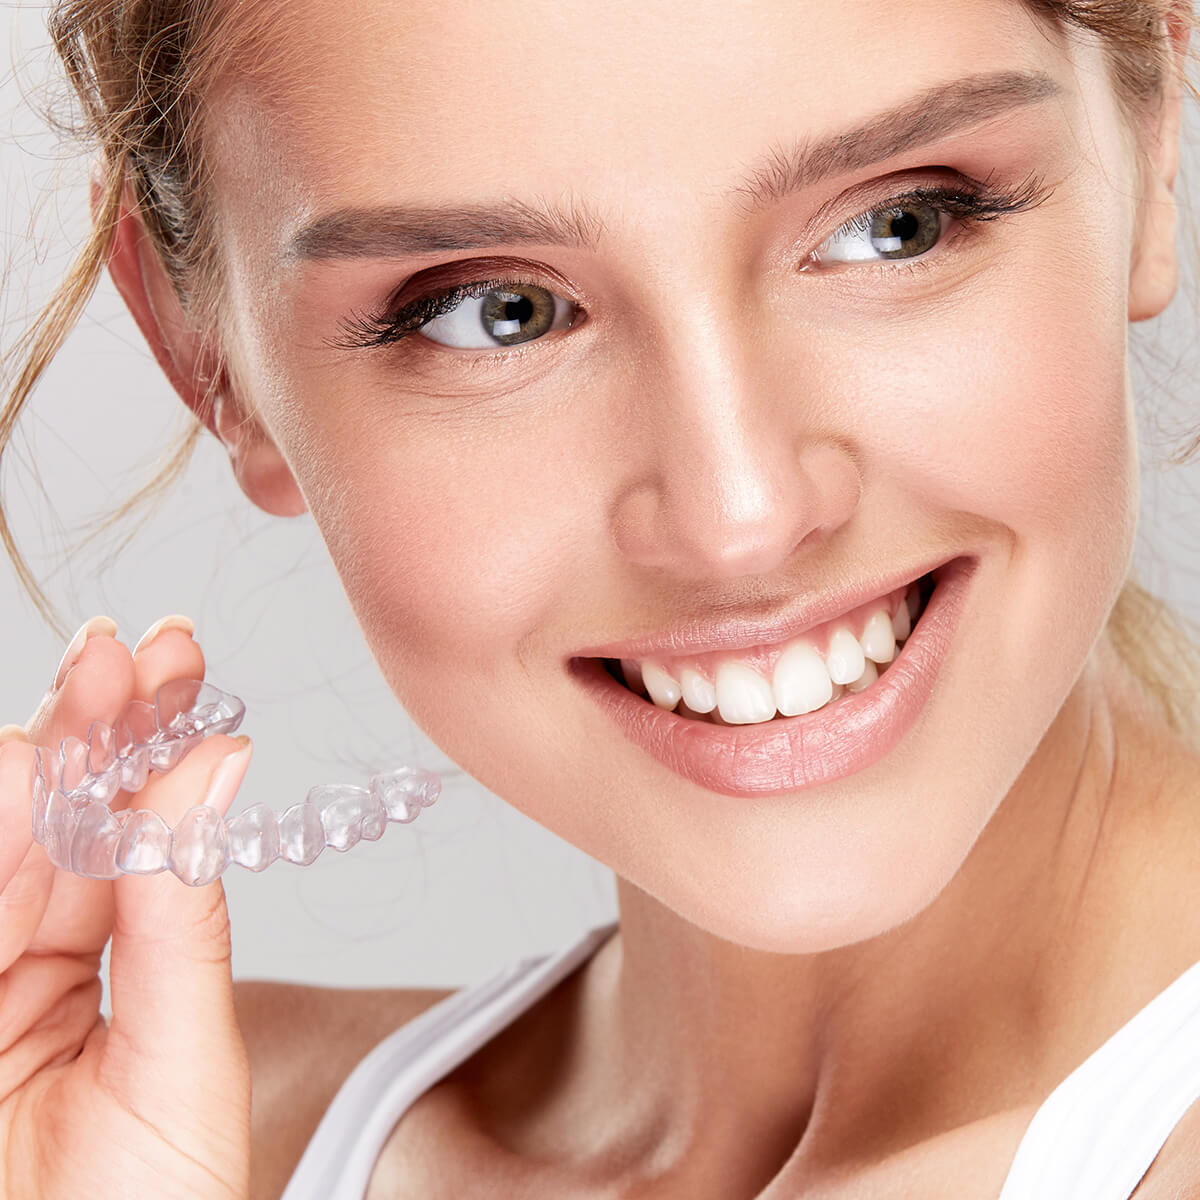 Correct your crossbite with Invisalign® clear aligners